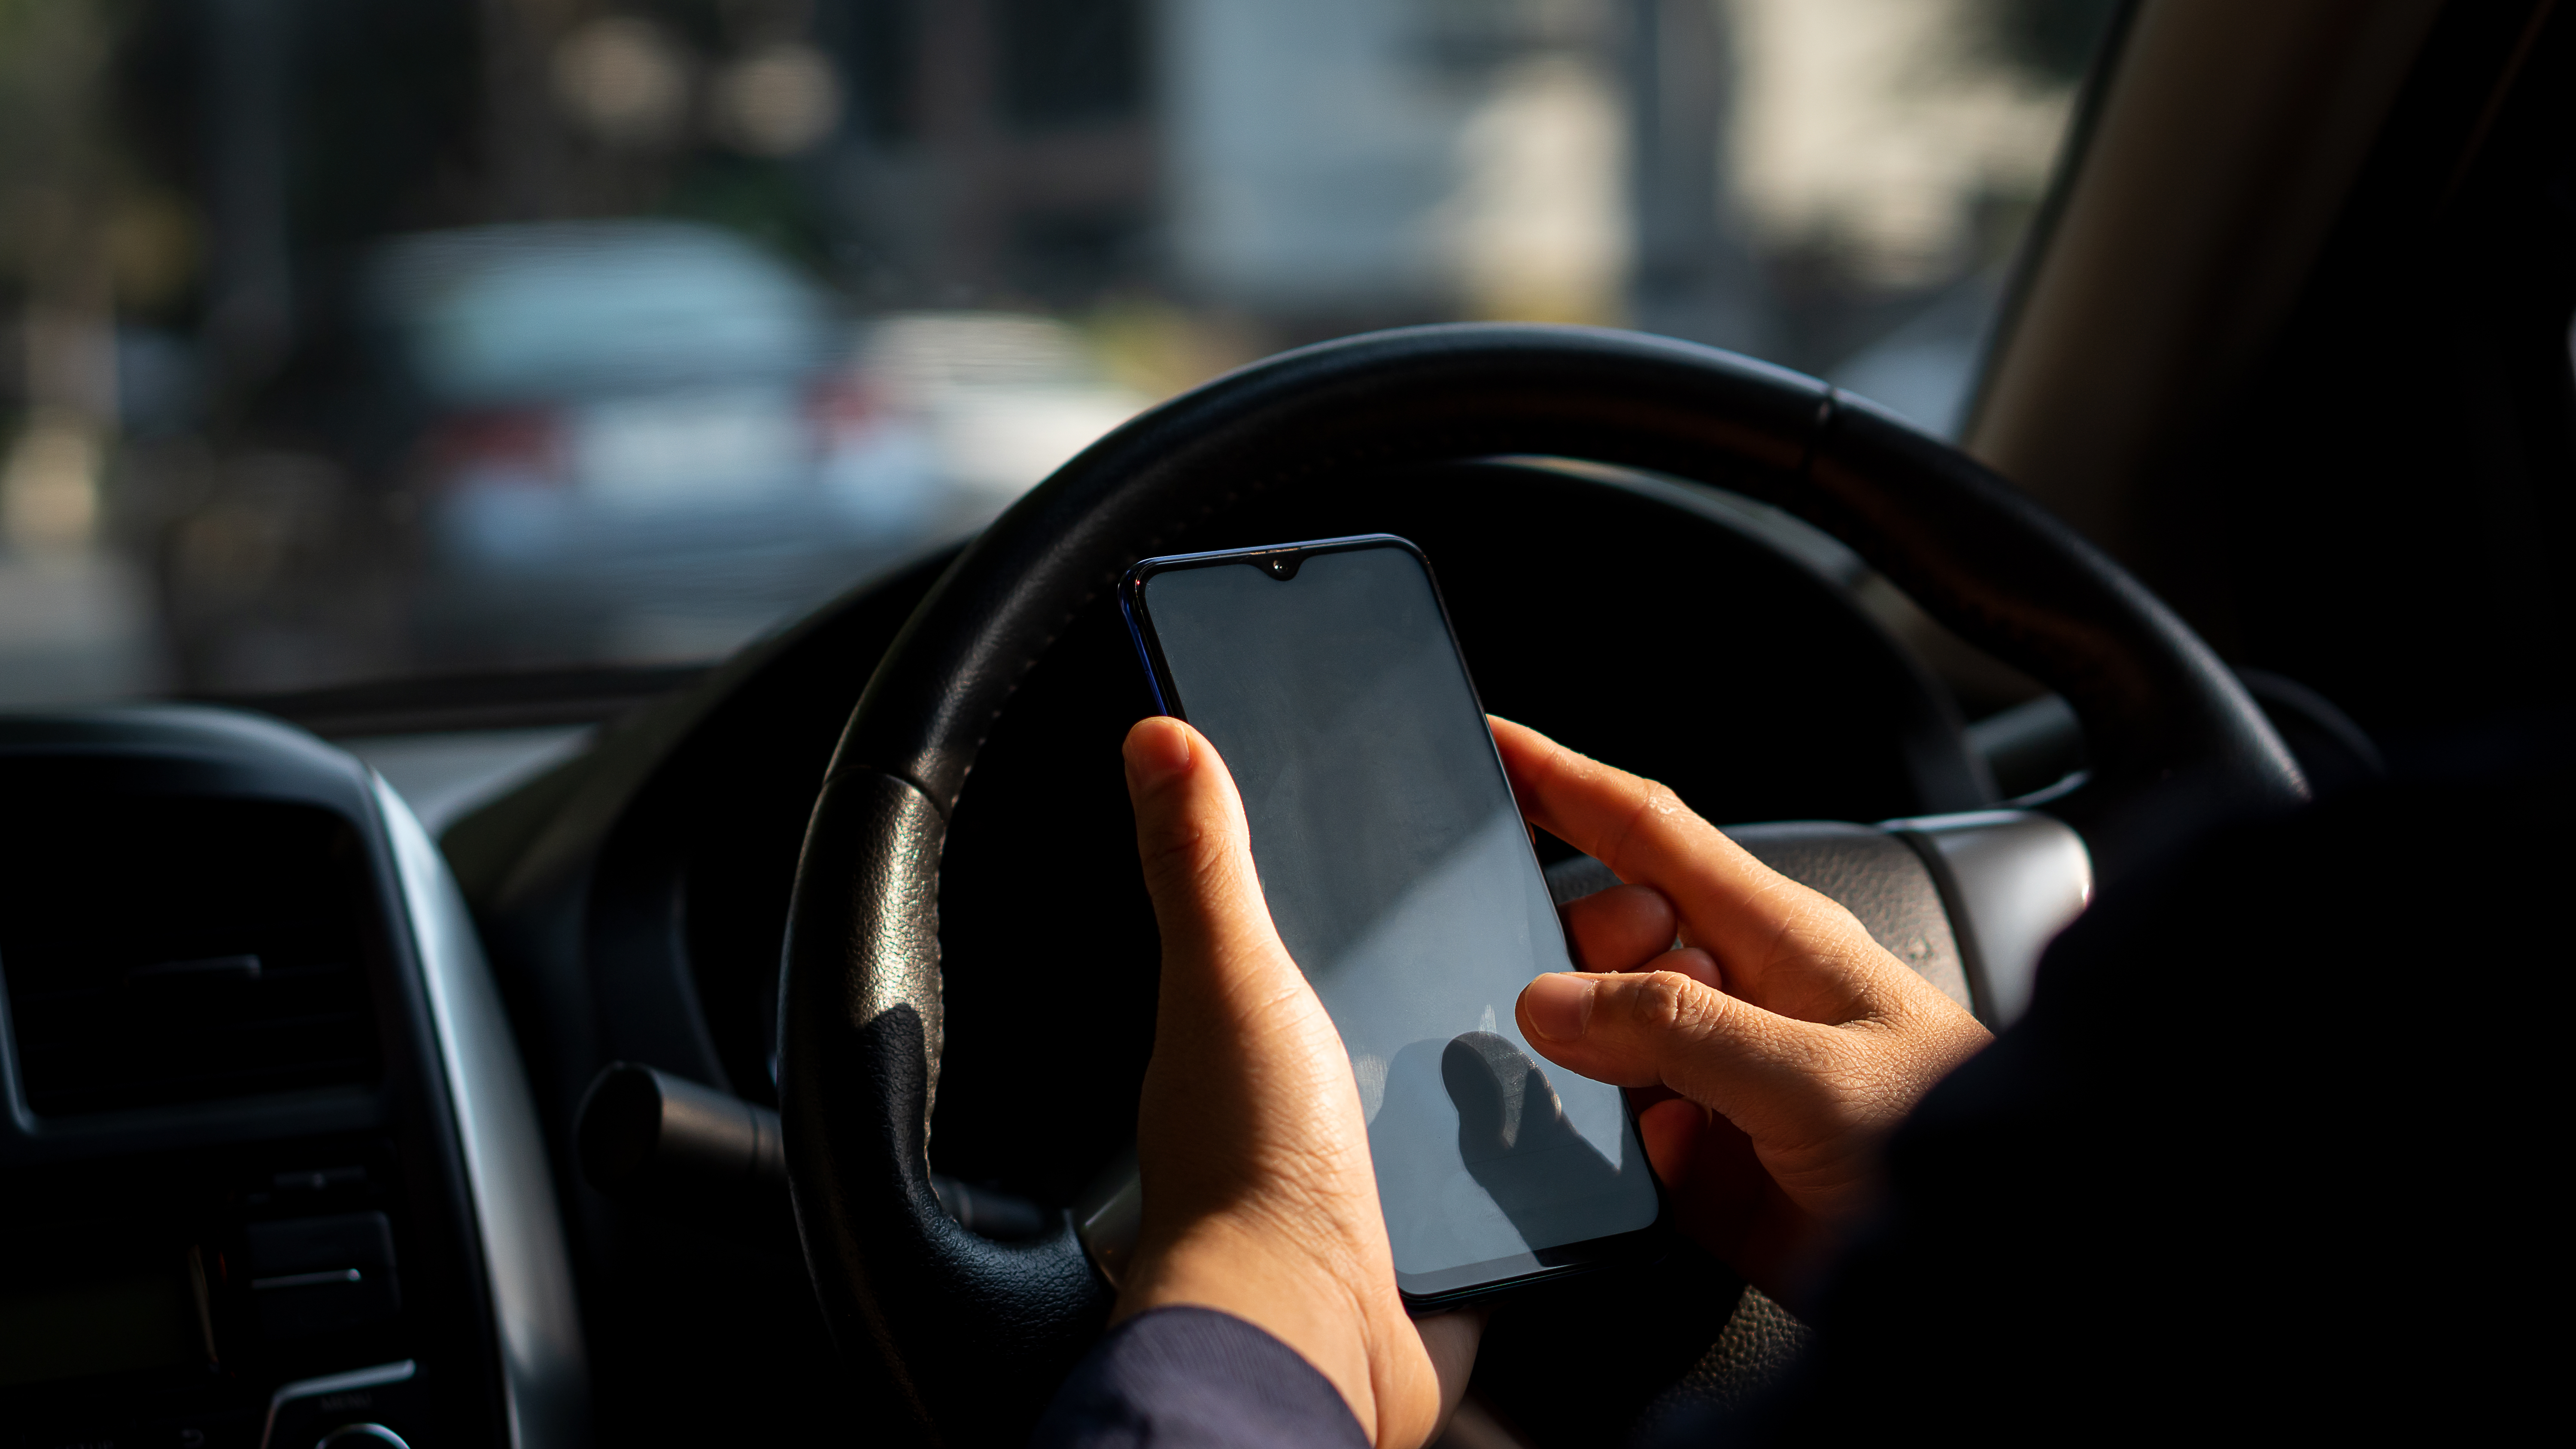 Picture of the driver's hand using a smart phone. | Source: Shutterstock